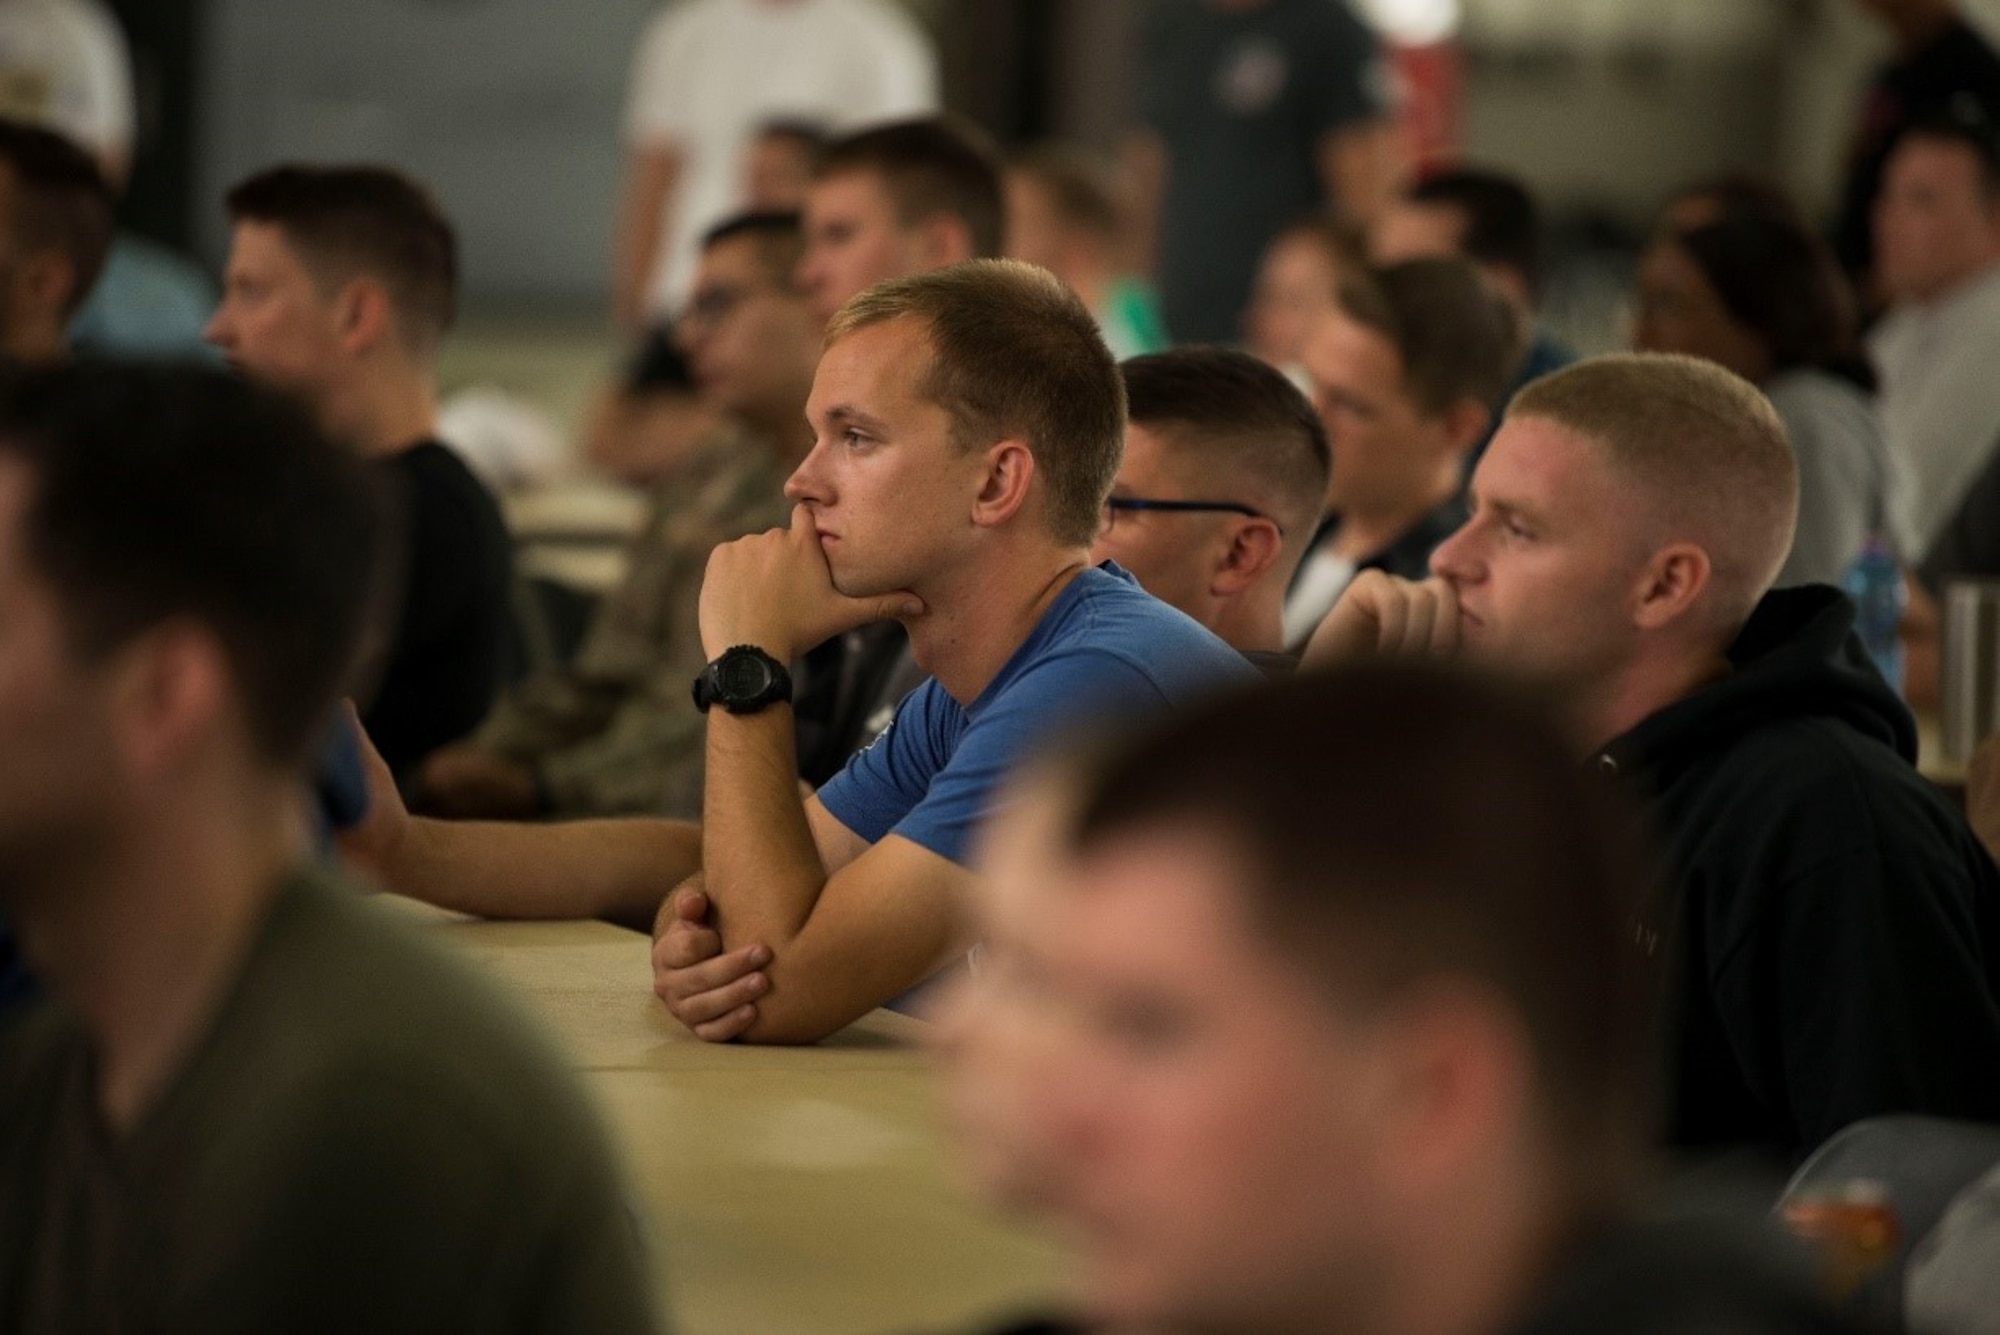 Airmen assigned to the 521st Air Mobility Operations Wing listen to guest speakers Capt. John Arroyo and Dr. Dave Roever on Sept. 15, 2019 at Ramstein Air Base, Germany. (U.S Air Force Photo by Senior Airman Sara Voigt)